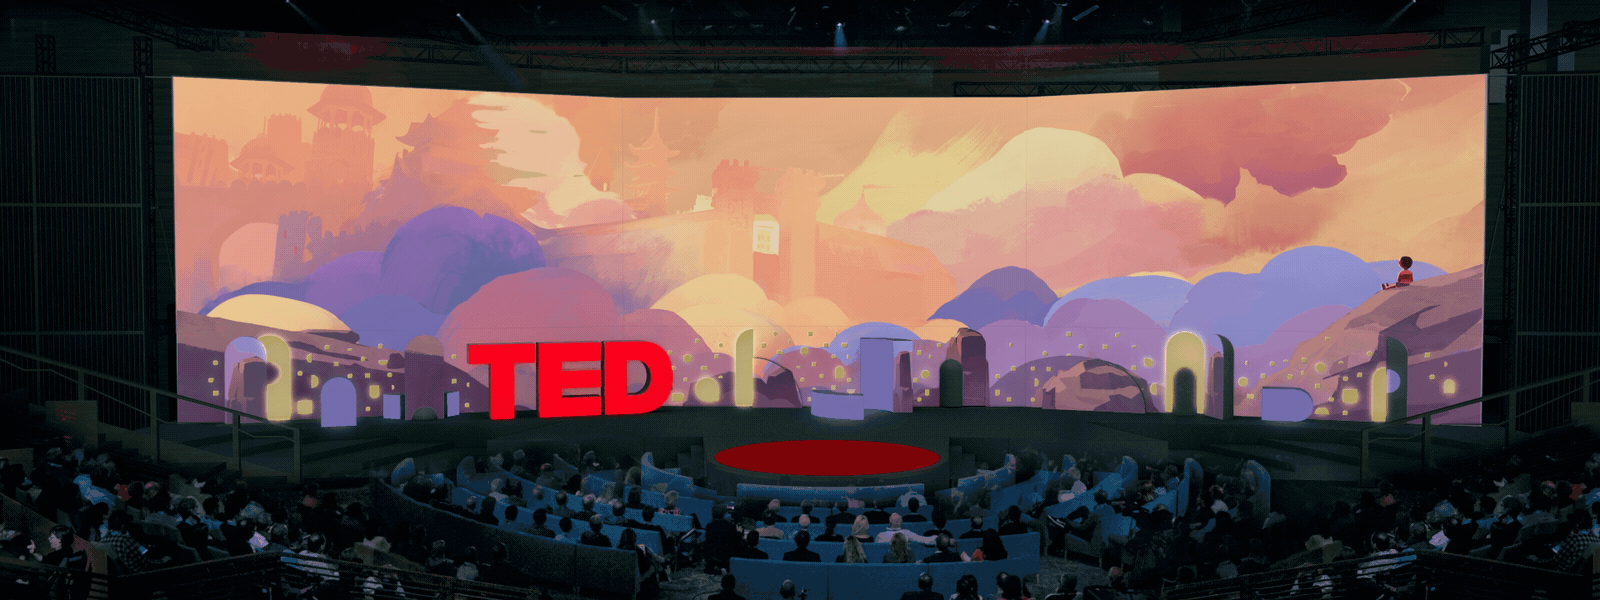 The stage visuals for the Wonder session.